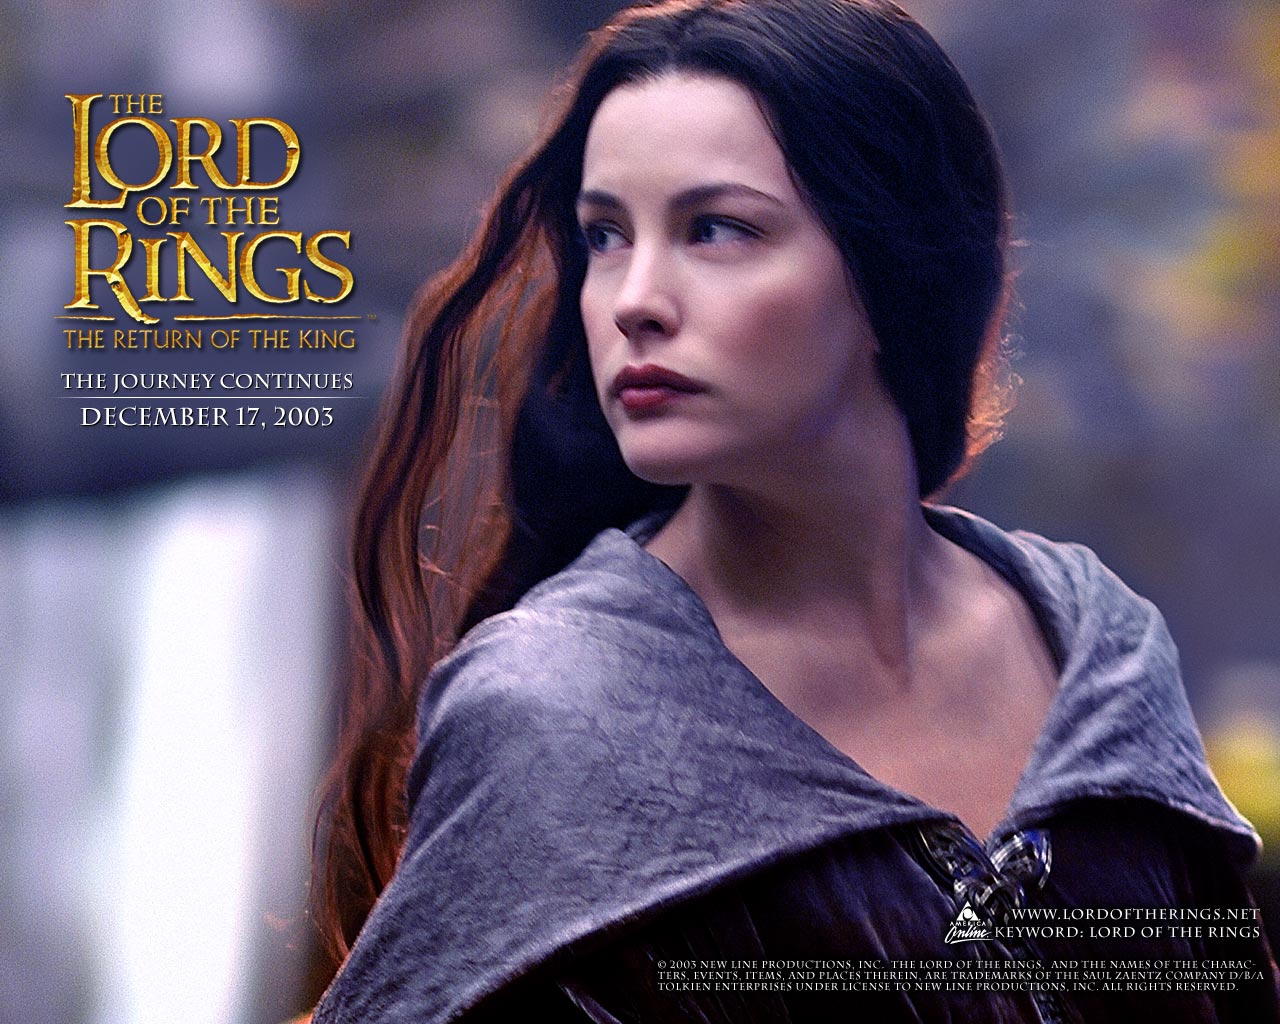 http://images.fanpop.com/images/image_uploads/Arwen-lord-of-the-rings-113081_1280_1024.jpg